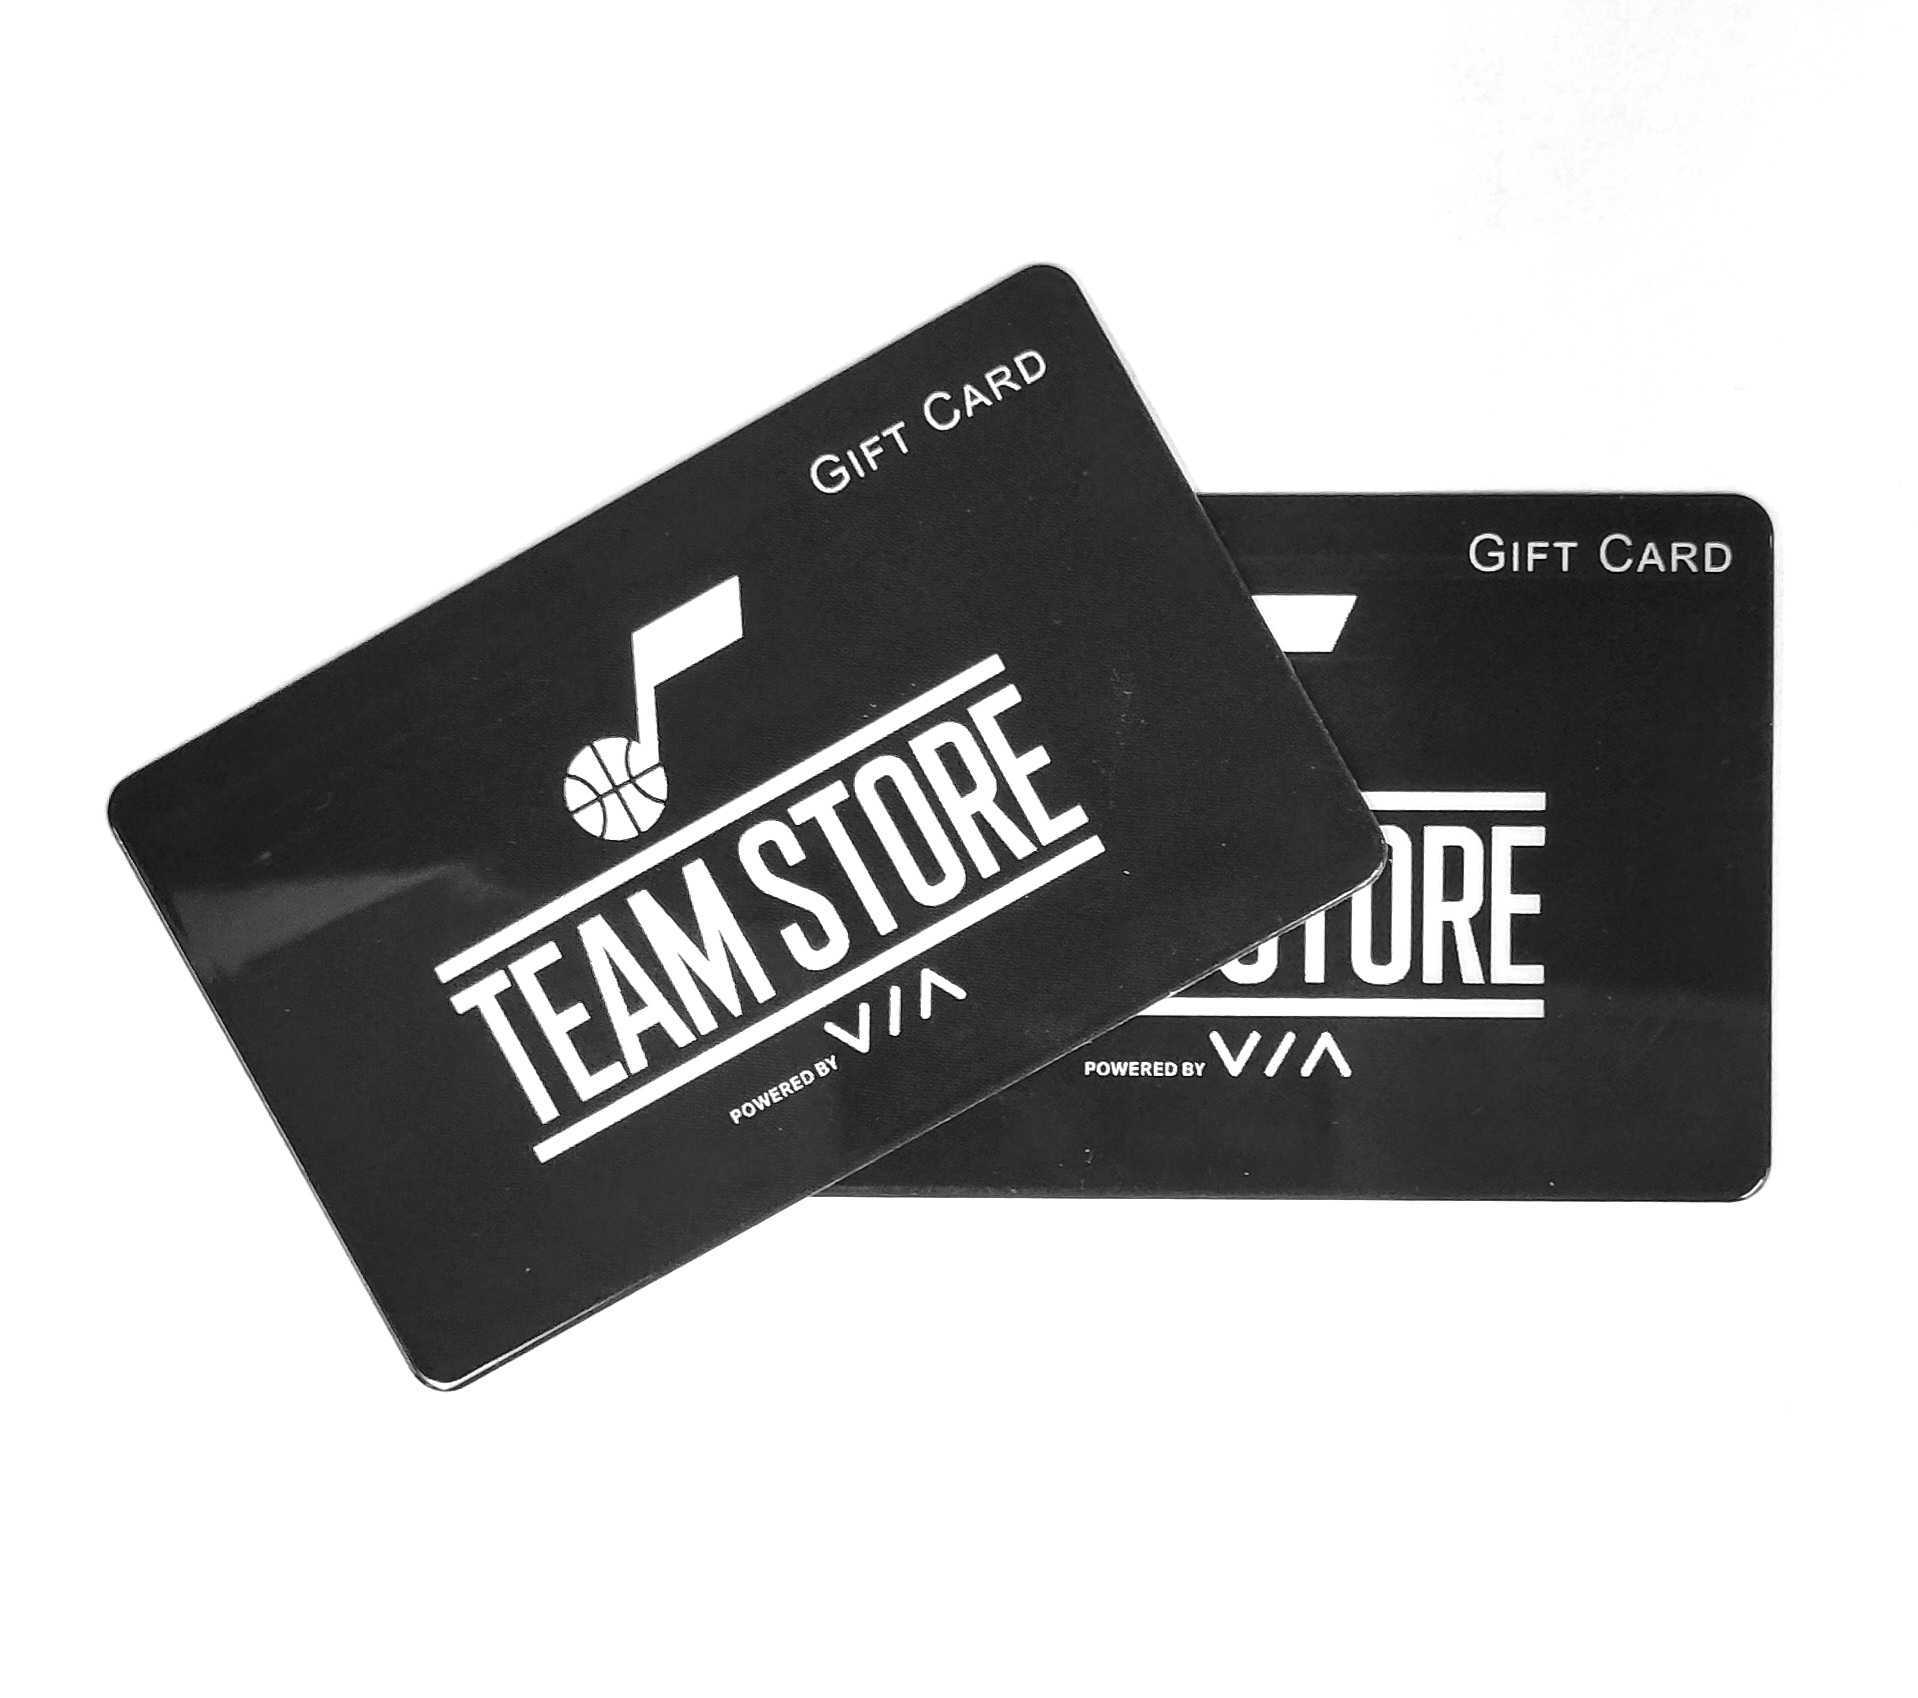 Utah Jazz - Get a Jazz Team Store gift card (enough for a